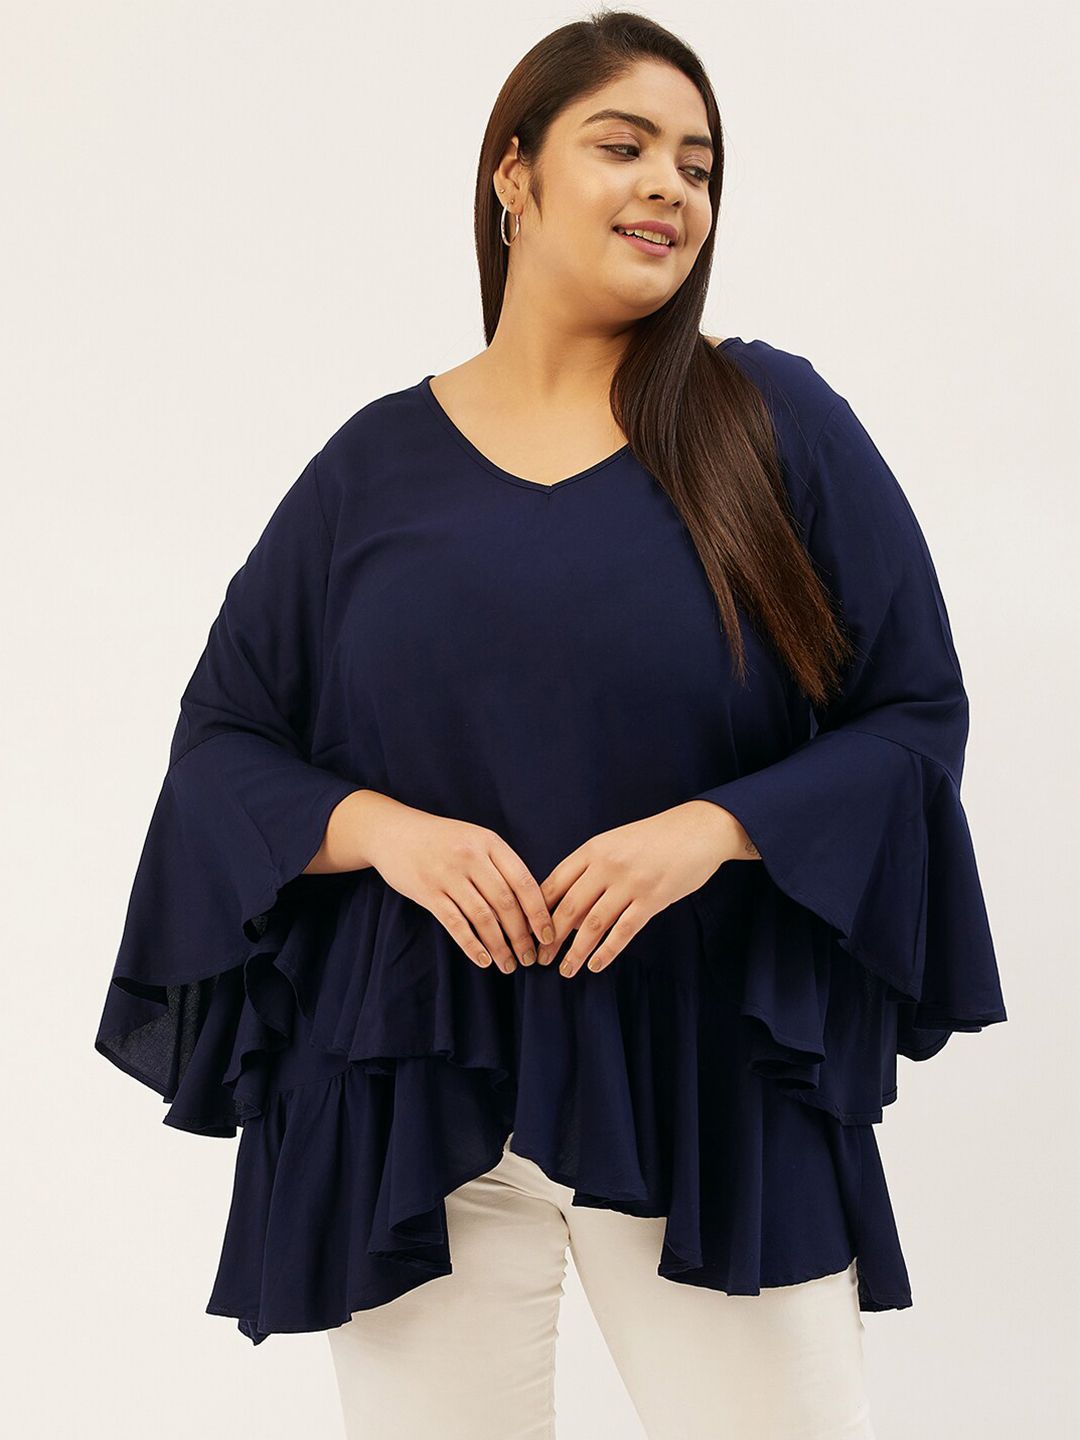 theRebelinme Plus Size Women Navy Blue Layered Peplum Top Price in India